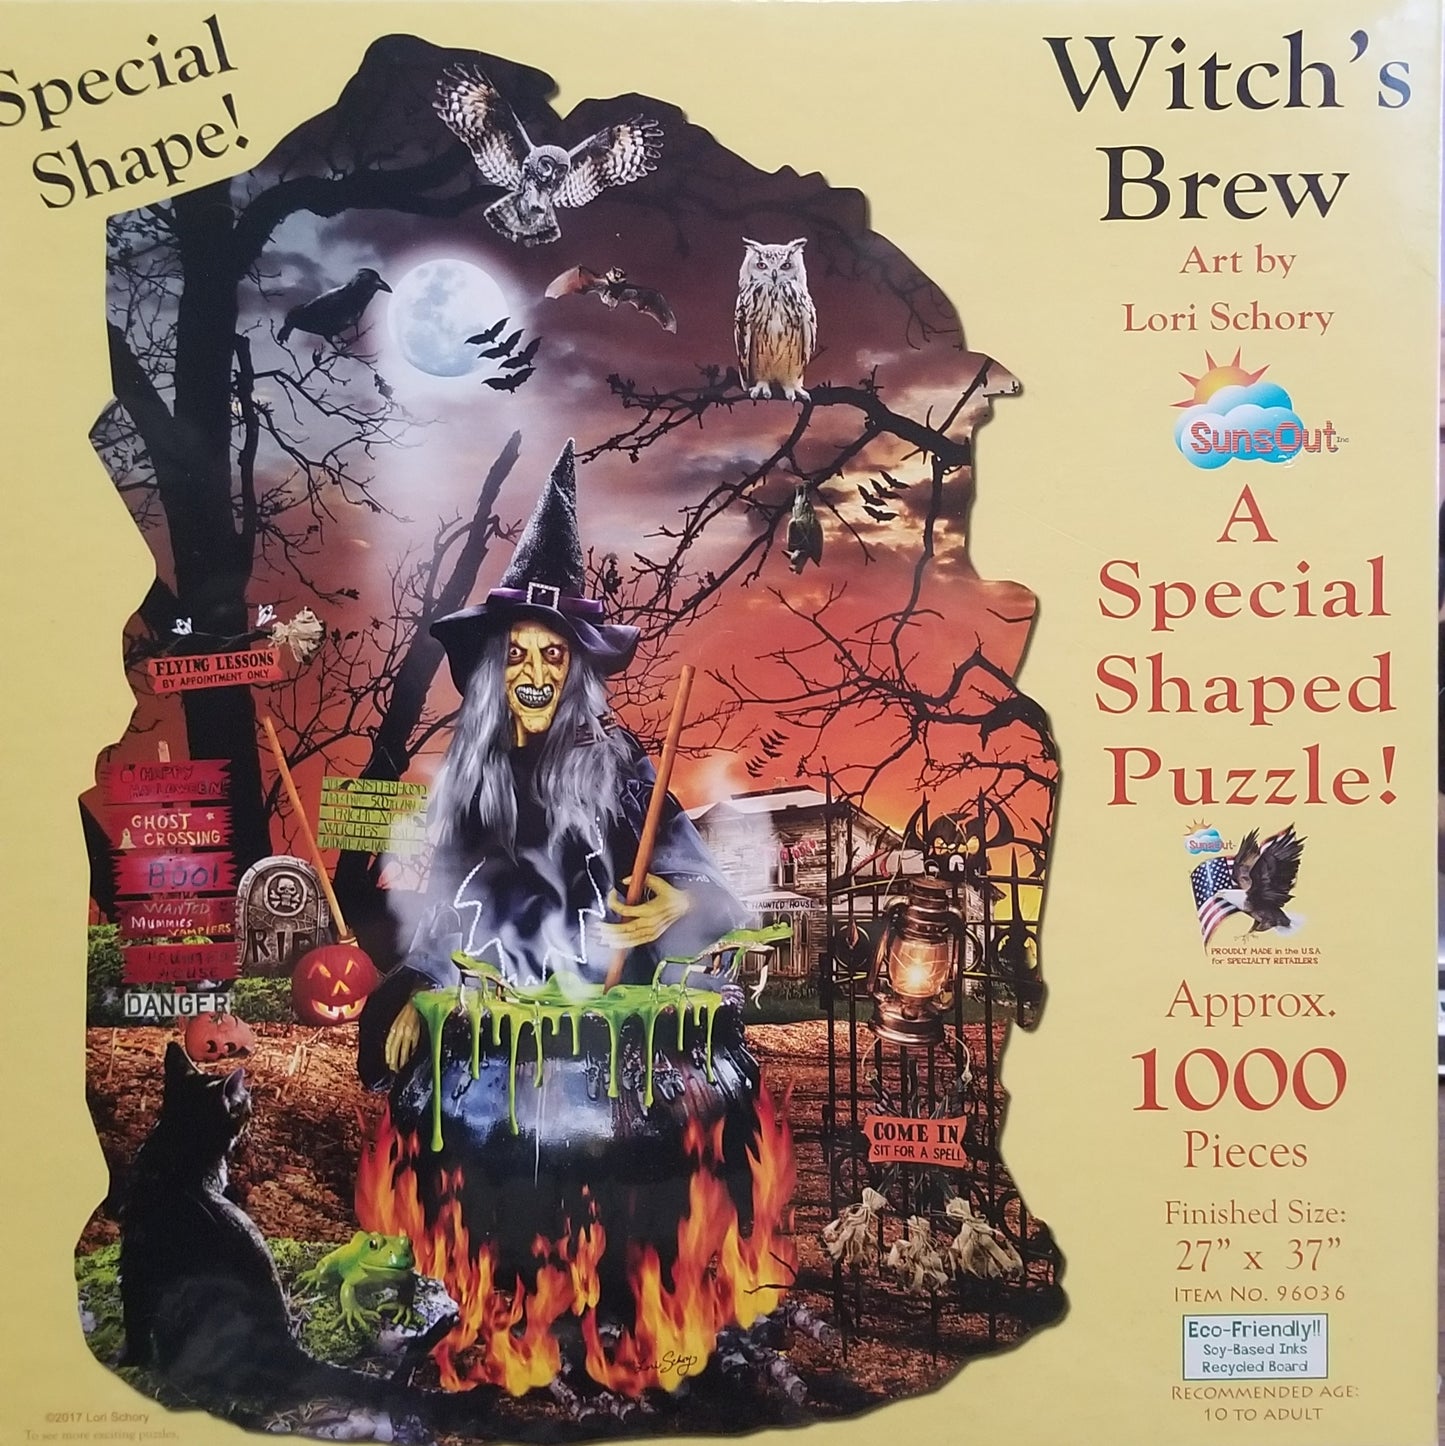 Witch's Brew by Lori Schory, 1000 Piece Puzzle